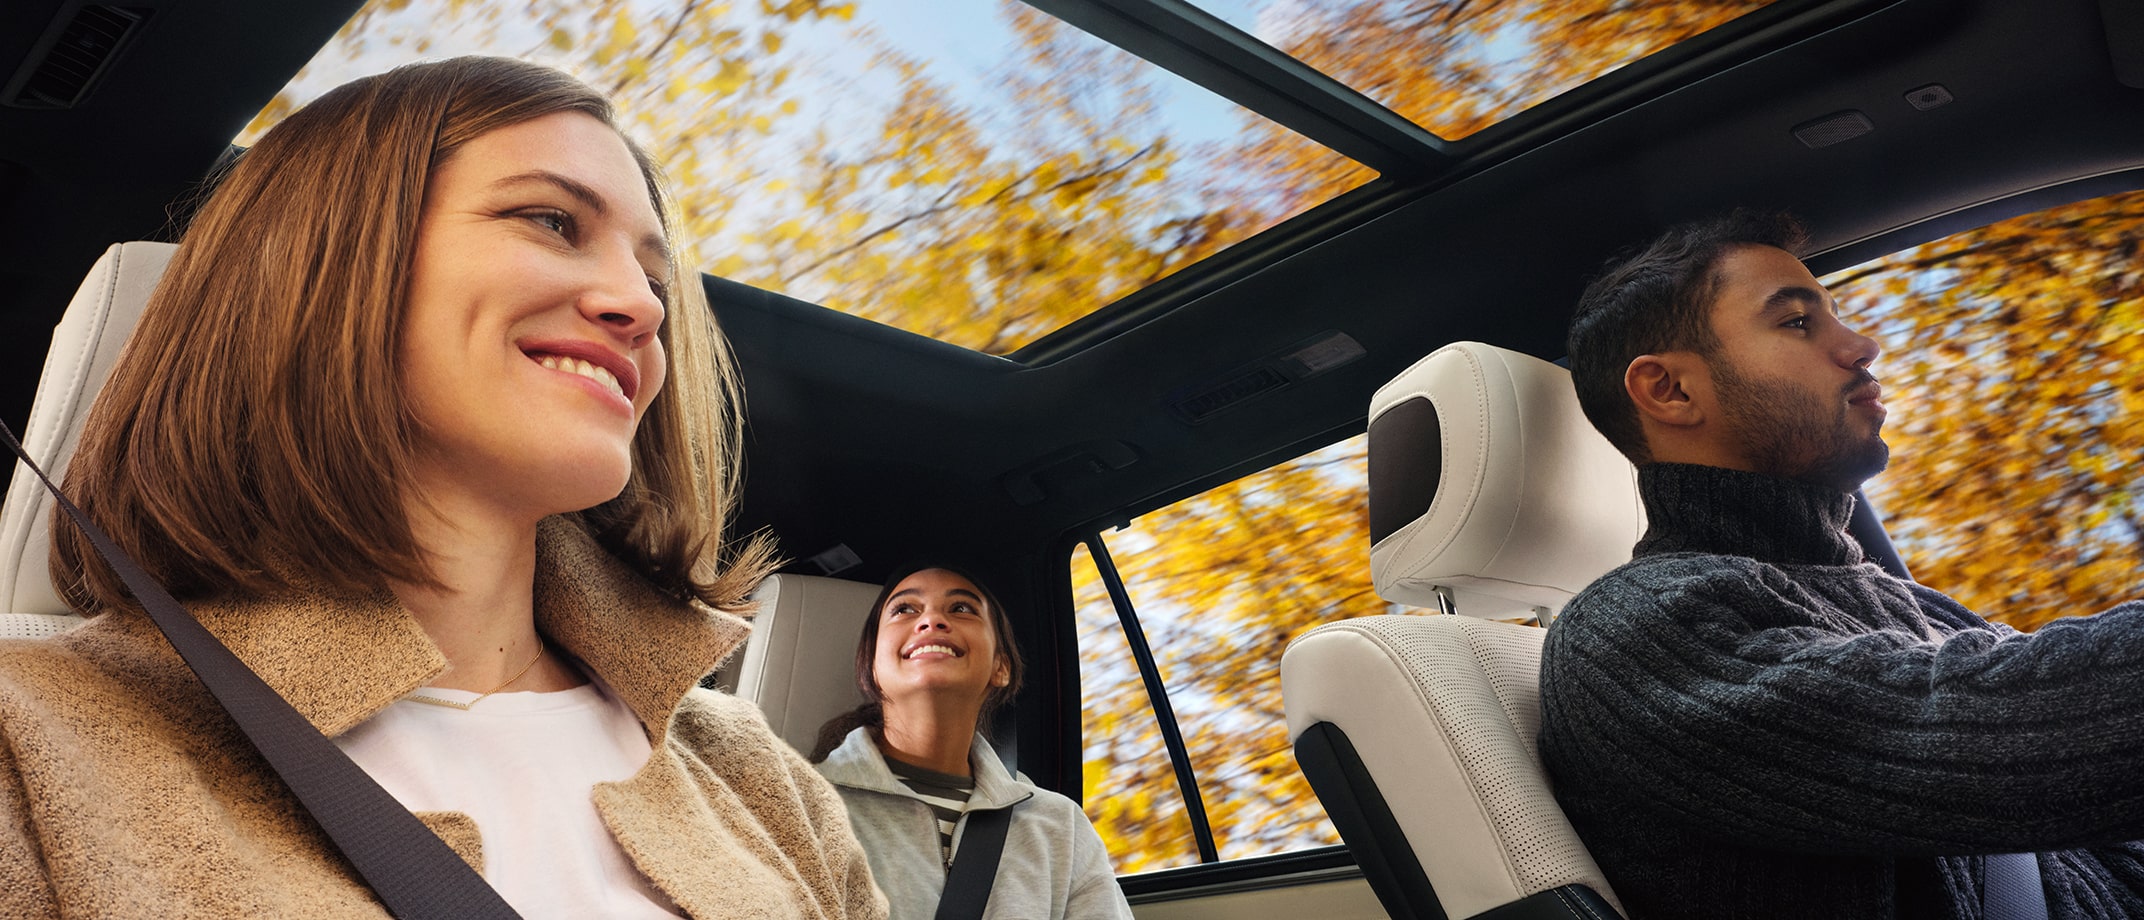 A couple on a drive with fall foliage; their daughter in the background looks up through the moonroof to take it all in.